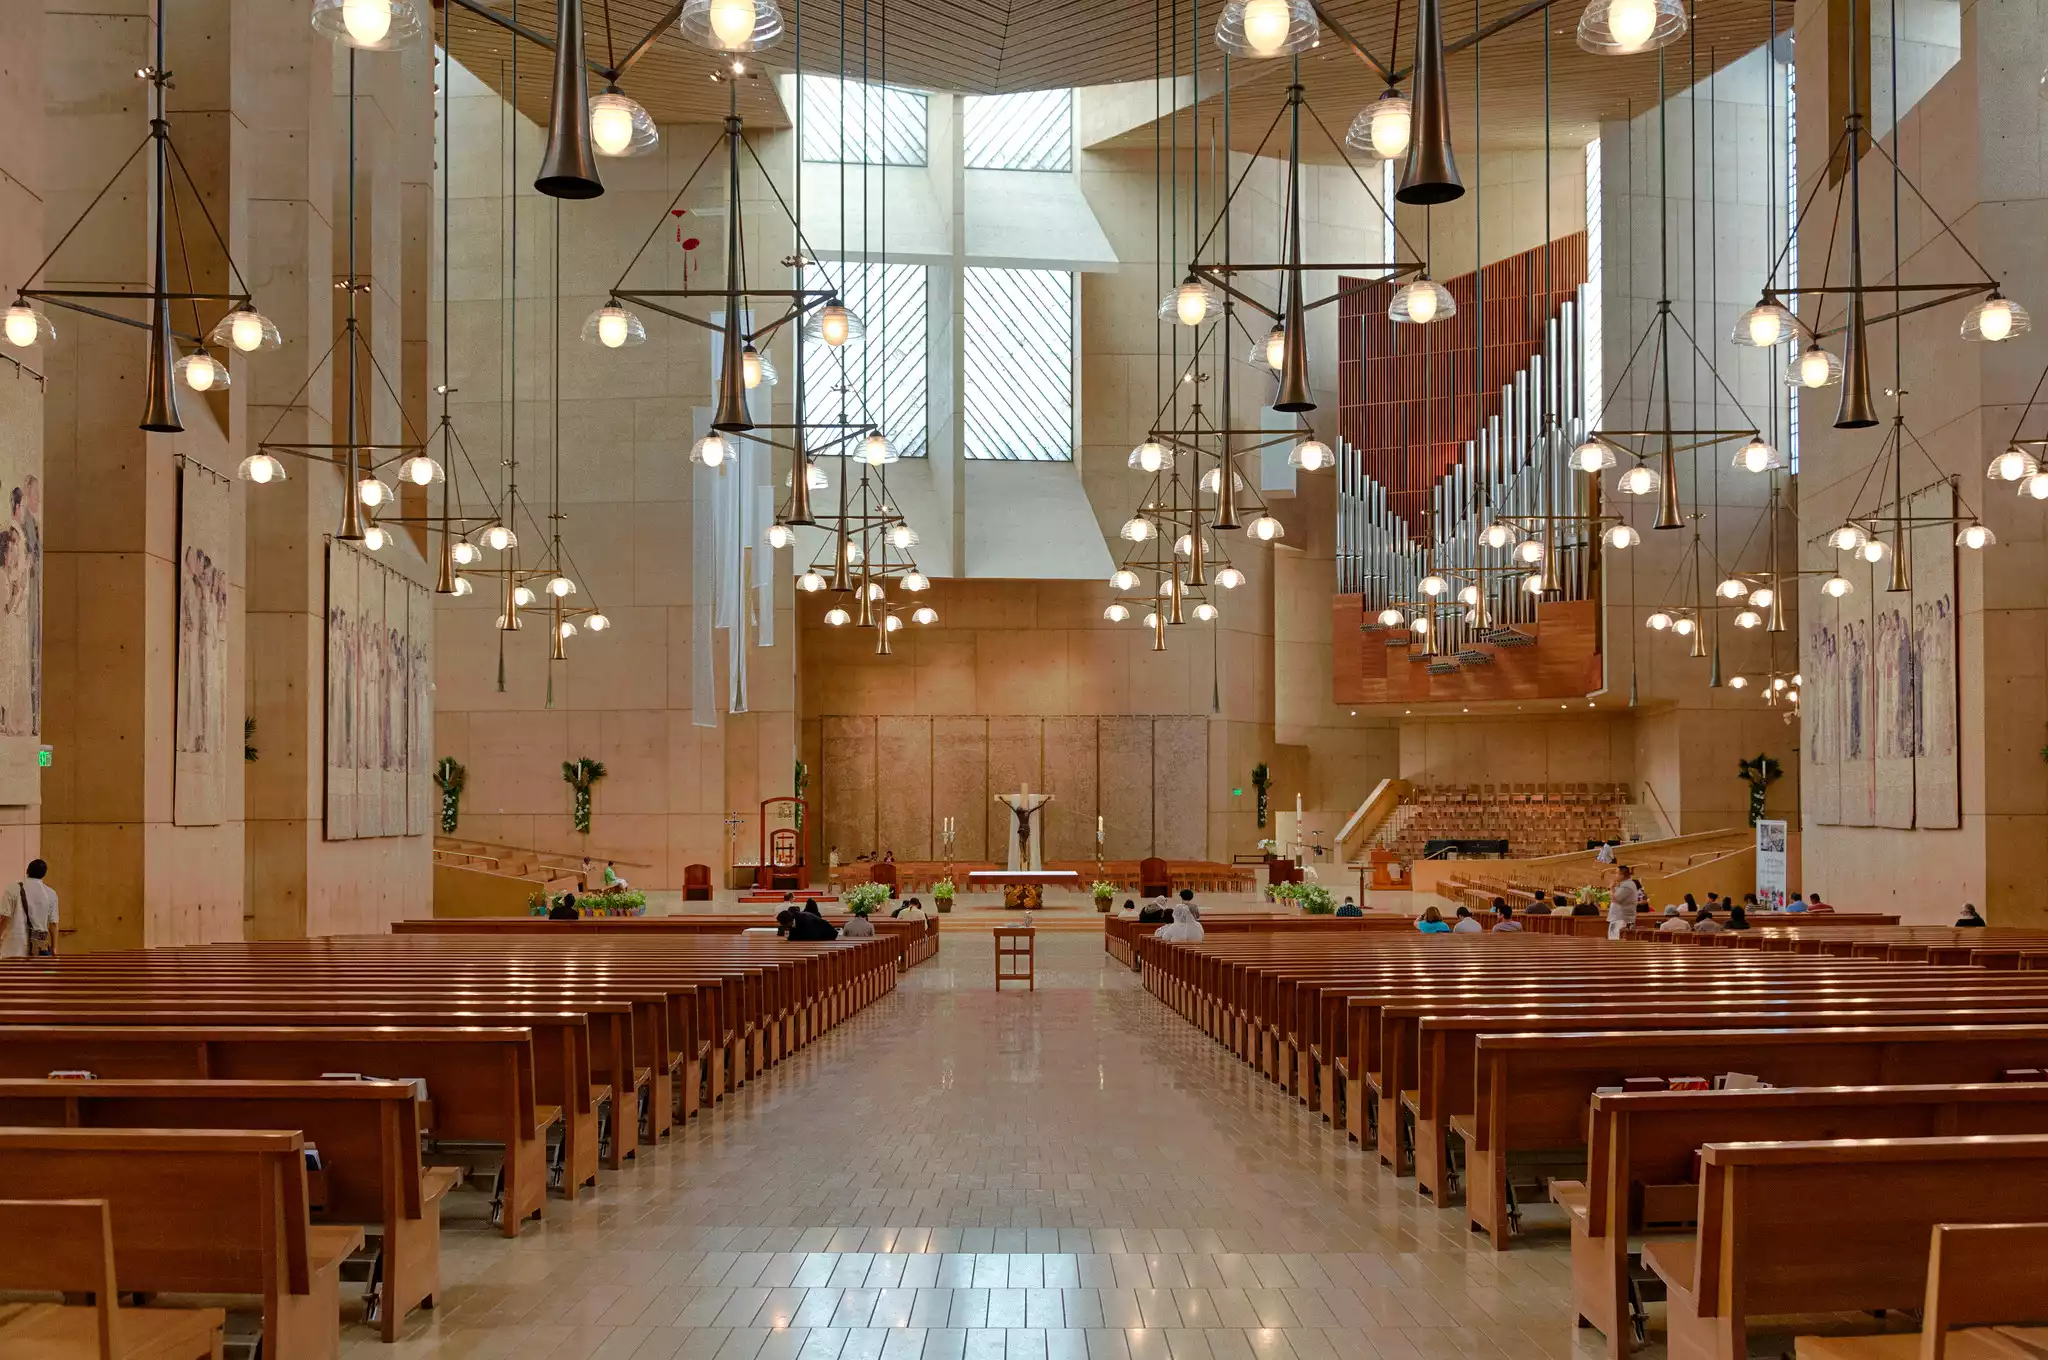 Cathedral of Our Lady of the Angels Nave #2